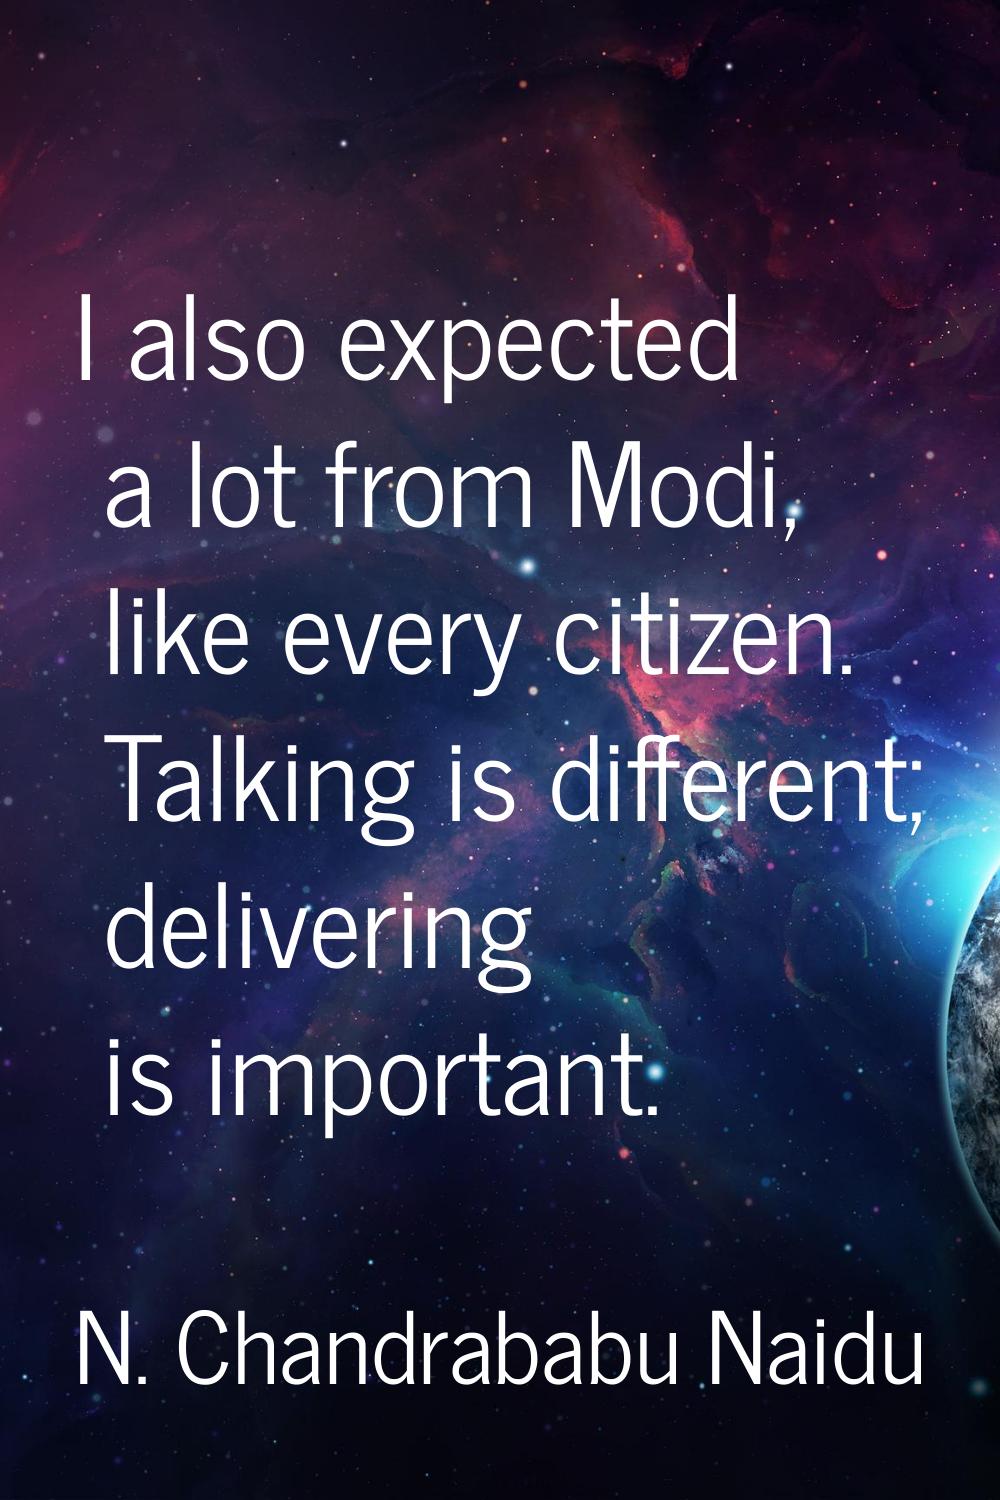 I also expected a lot from Modi, like every citizen. Talking is different; delivering is important.